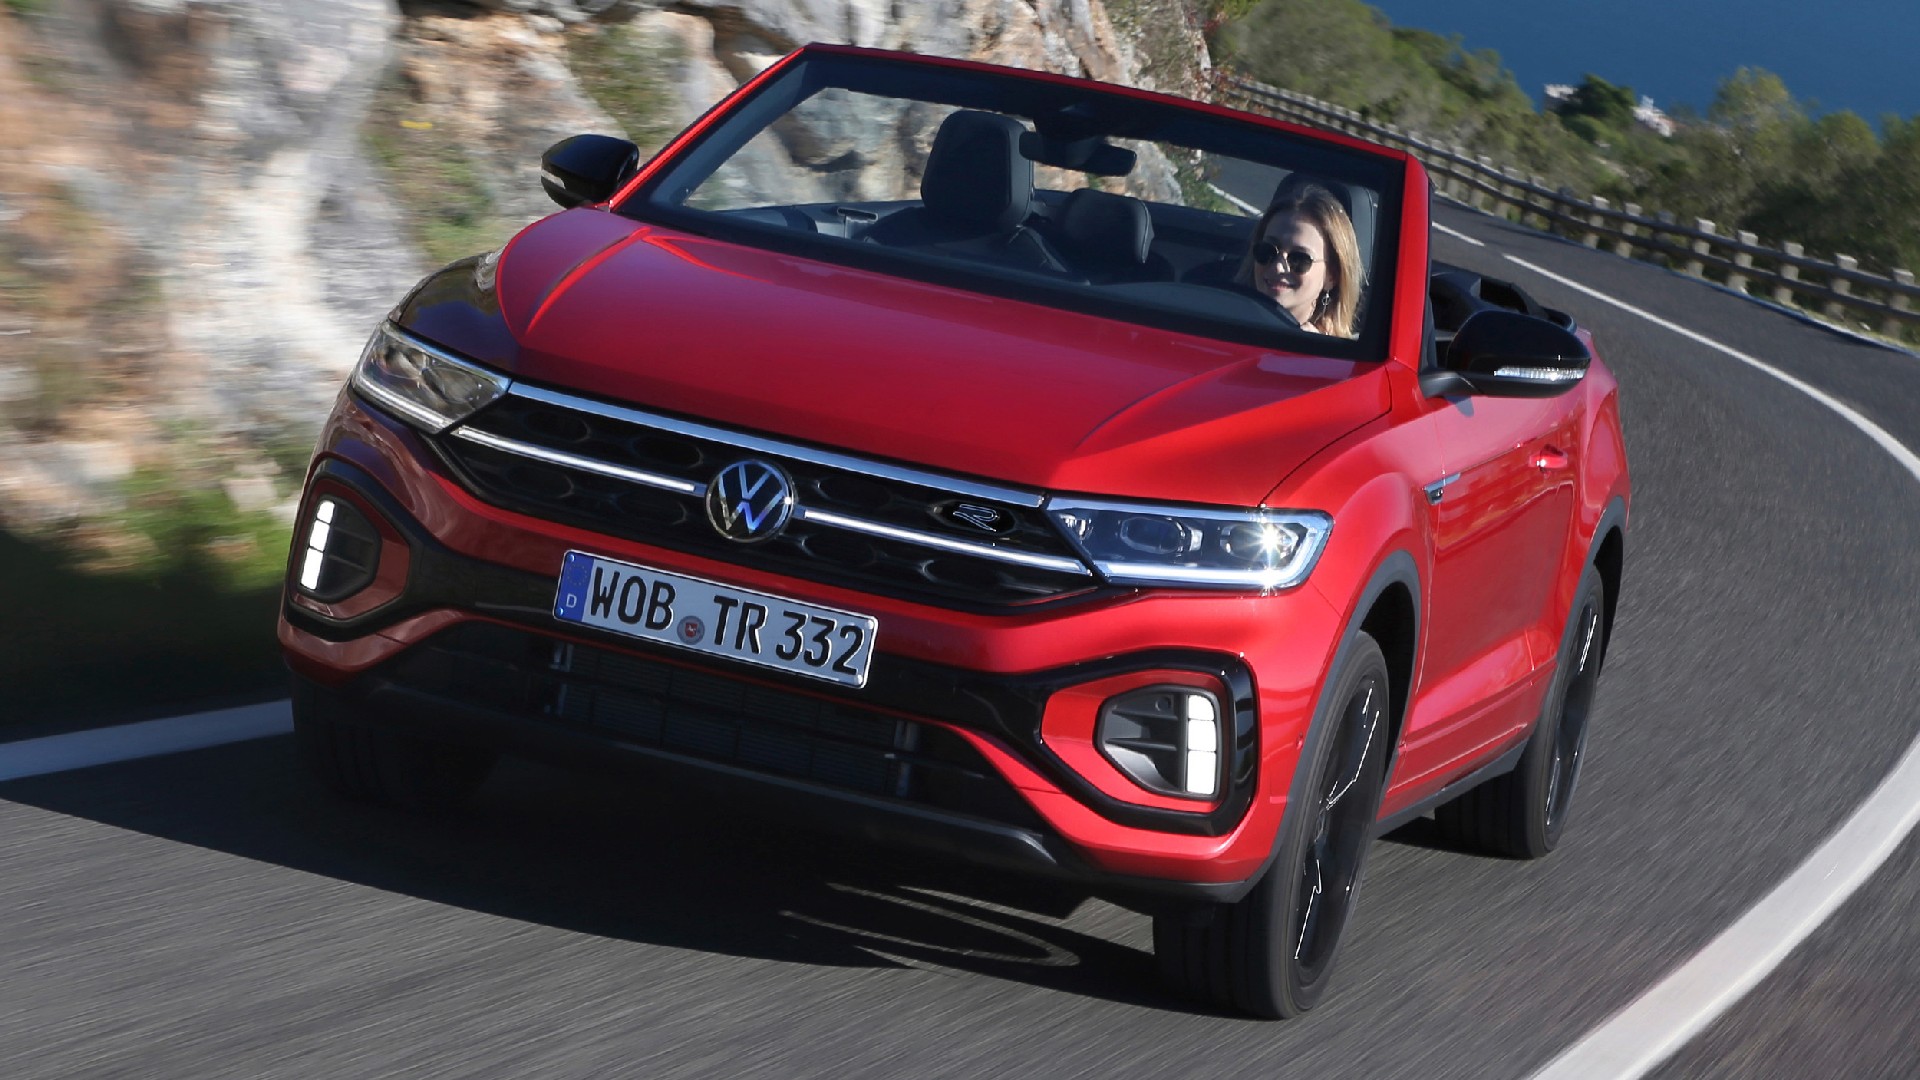 VW T-Roc Facelift Gets Updated 1.5 TSI Evo2 Engine With Better